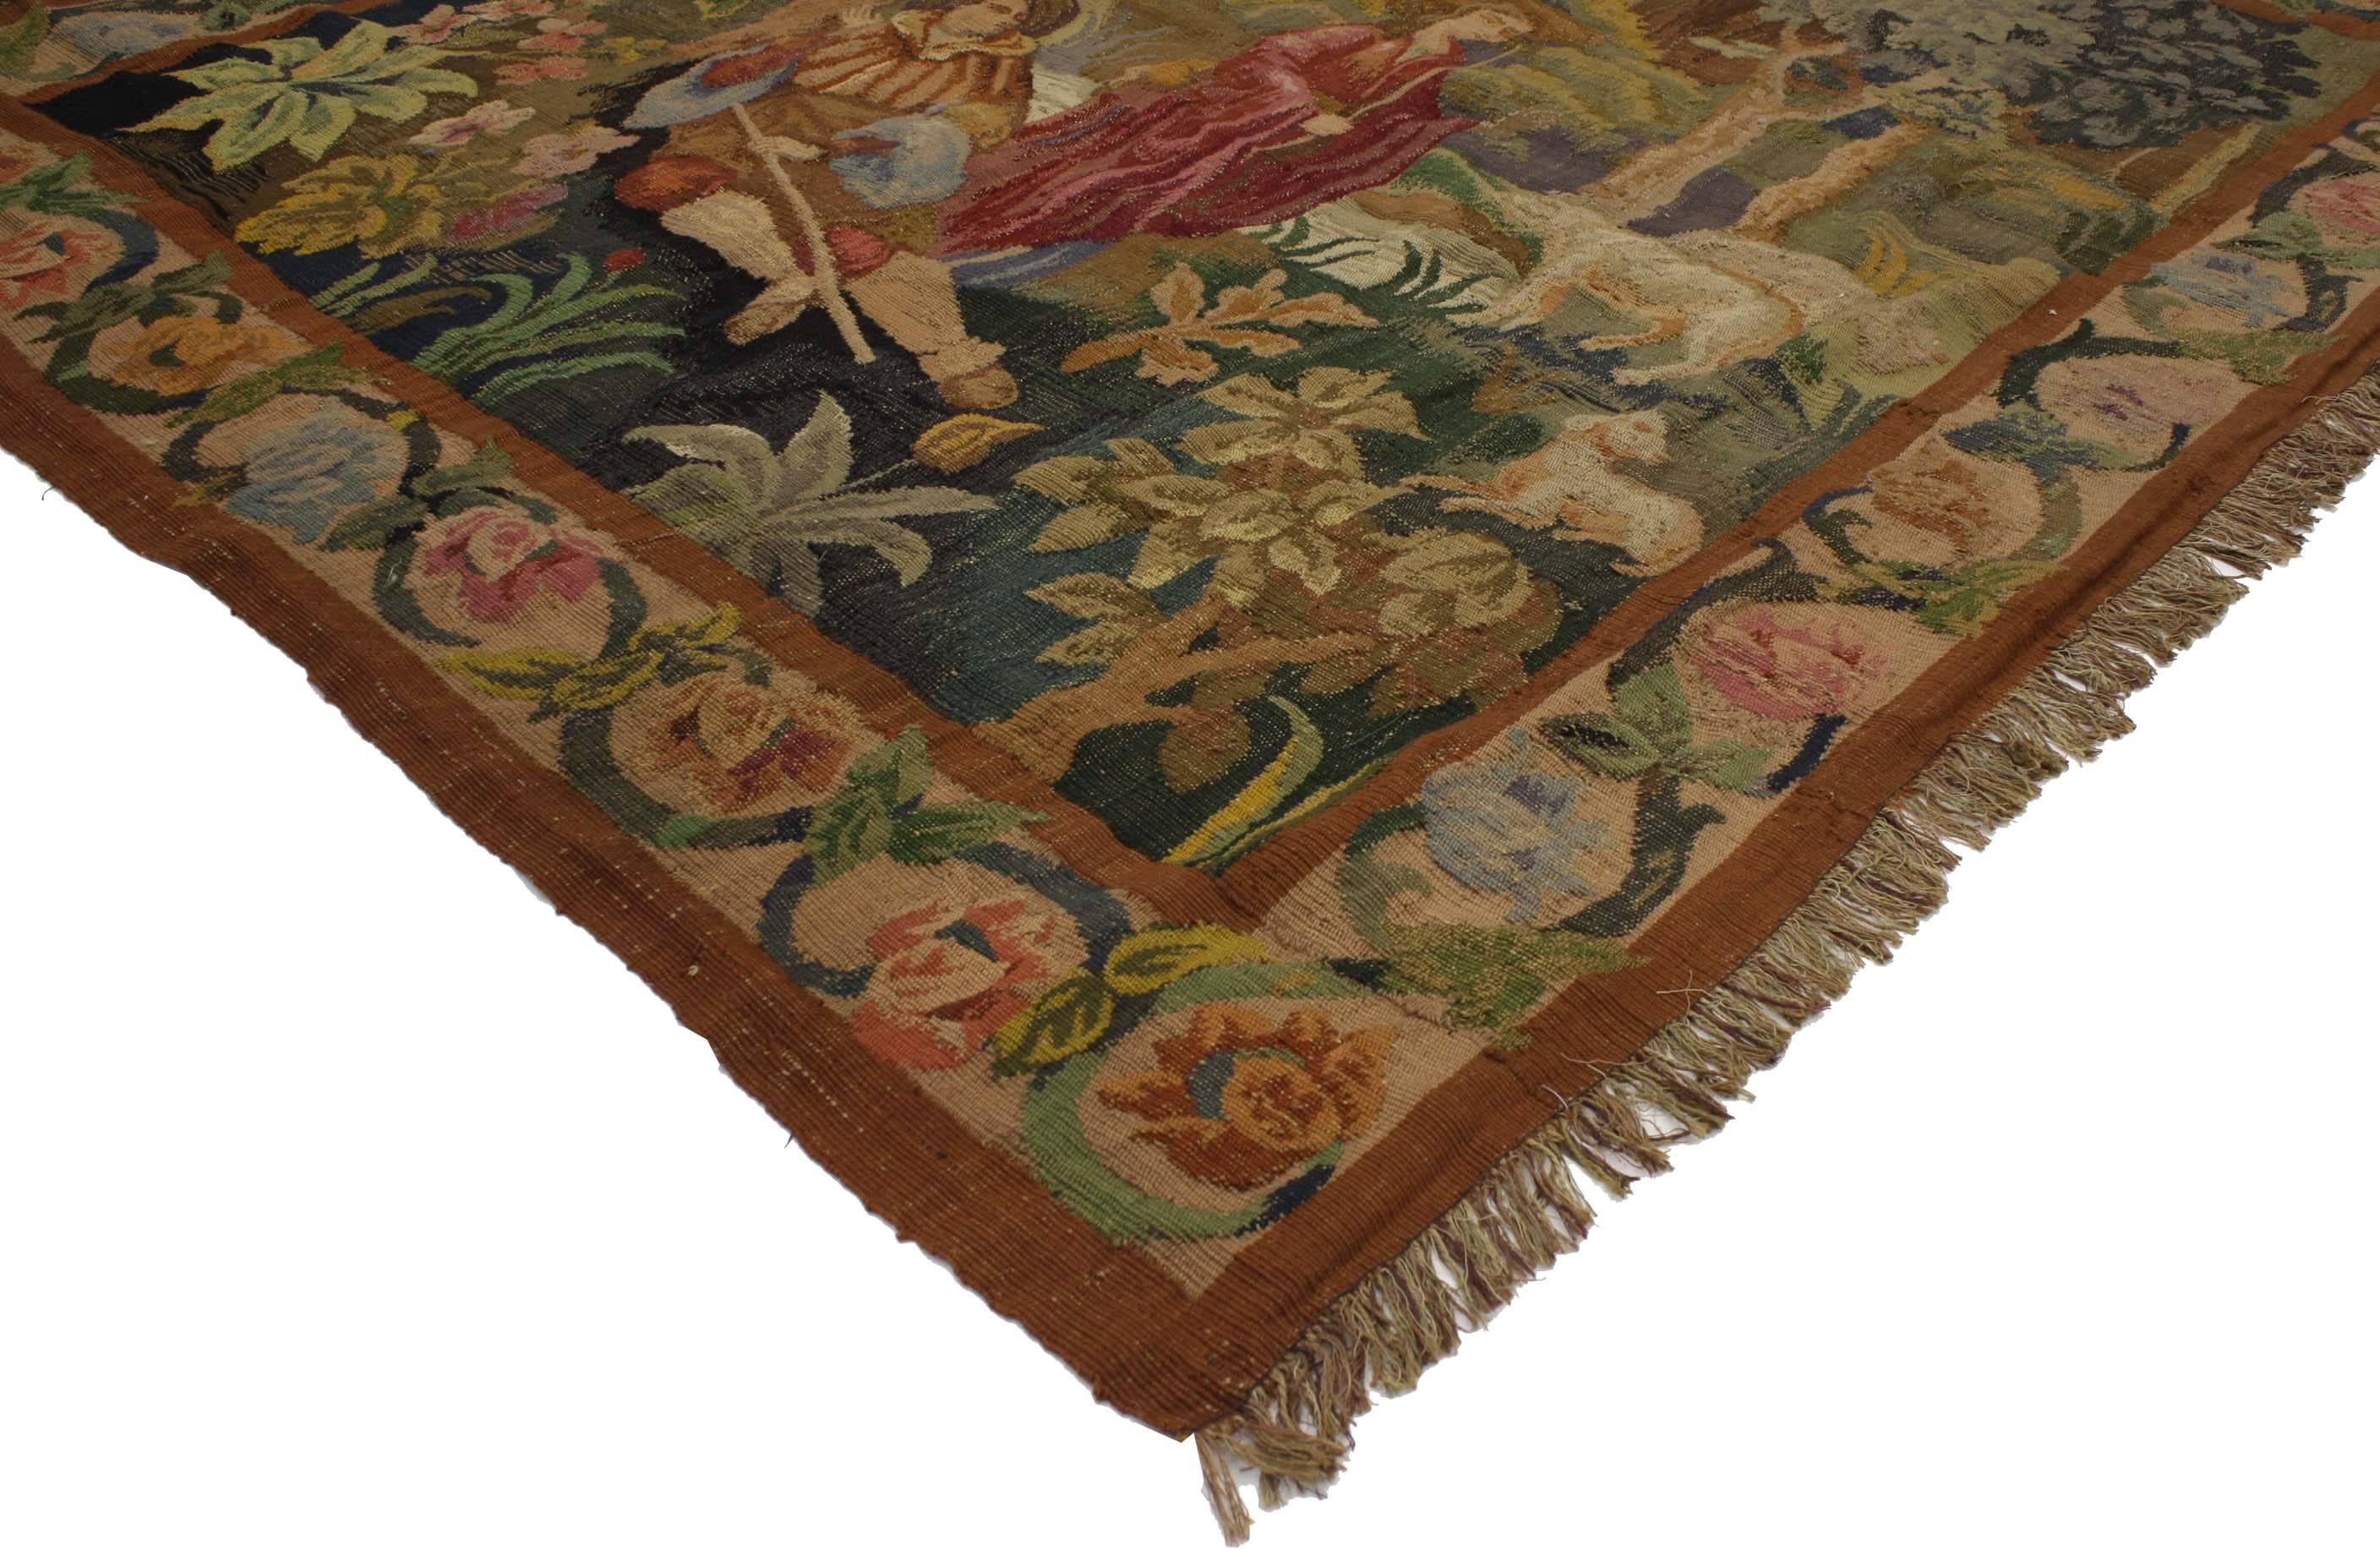 76929 Late 19th Century Antique French Aubusson Tapestry, Shepherd and Shepherdess Verdure Wall Hanging. Drawing inspiration from South Netherlandish (ca. 1500–1530) and Medieval Art, this hand-woven silk and wool antique French Aubusson tapestry